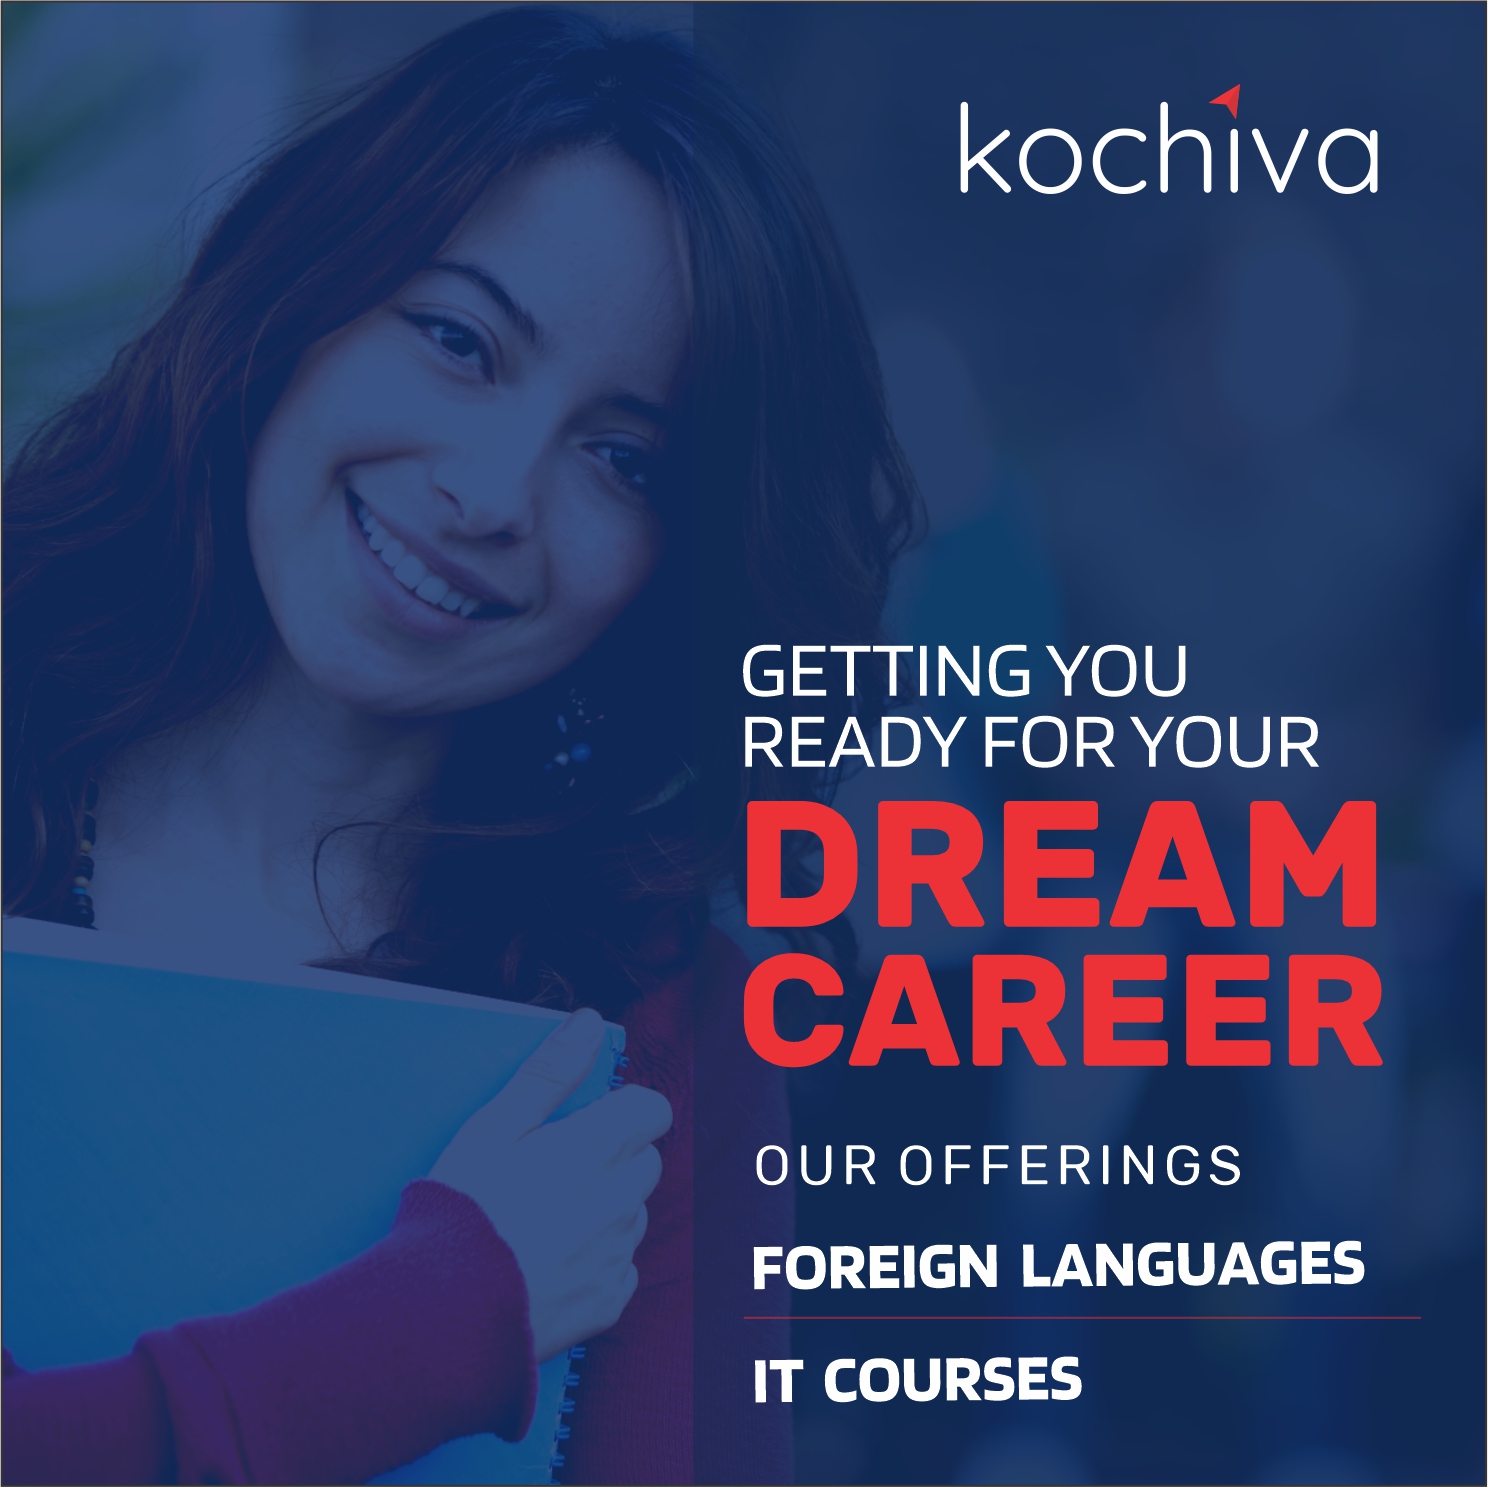 kochiva | foreign languages | german | french | it training | 100% placement assistance | educational services in vadodara (baroda)